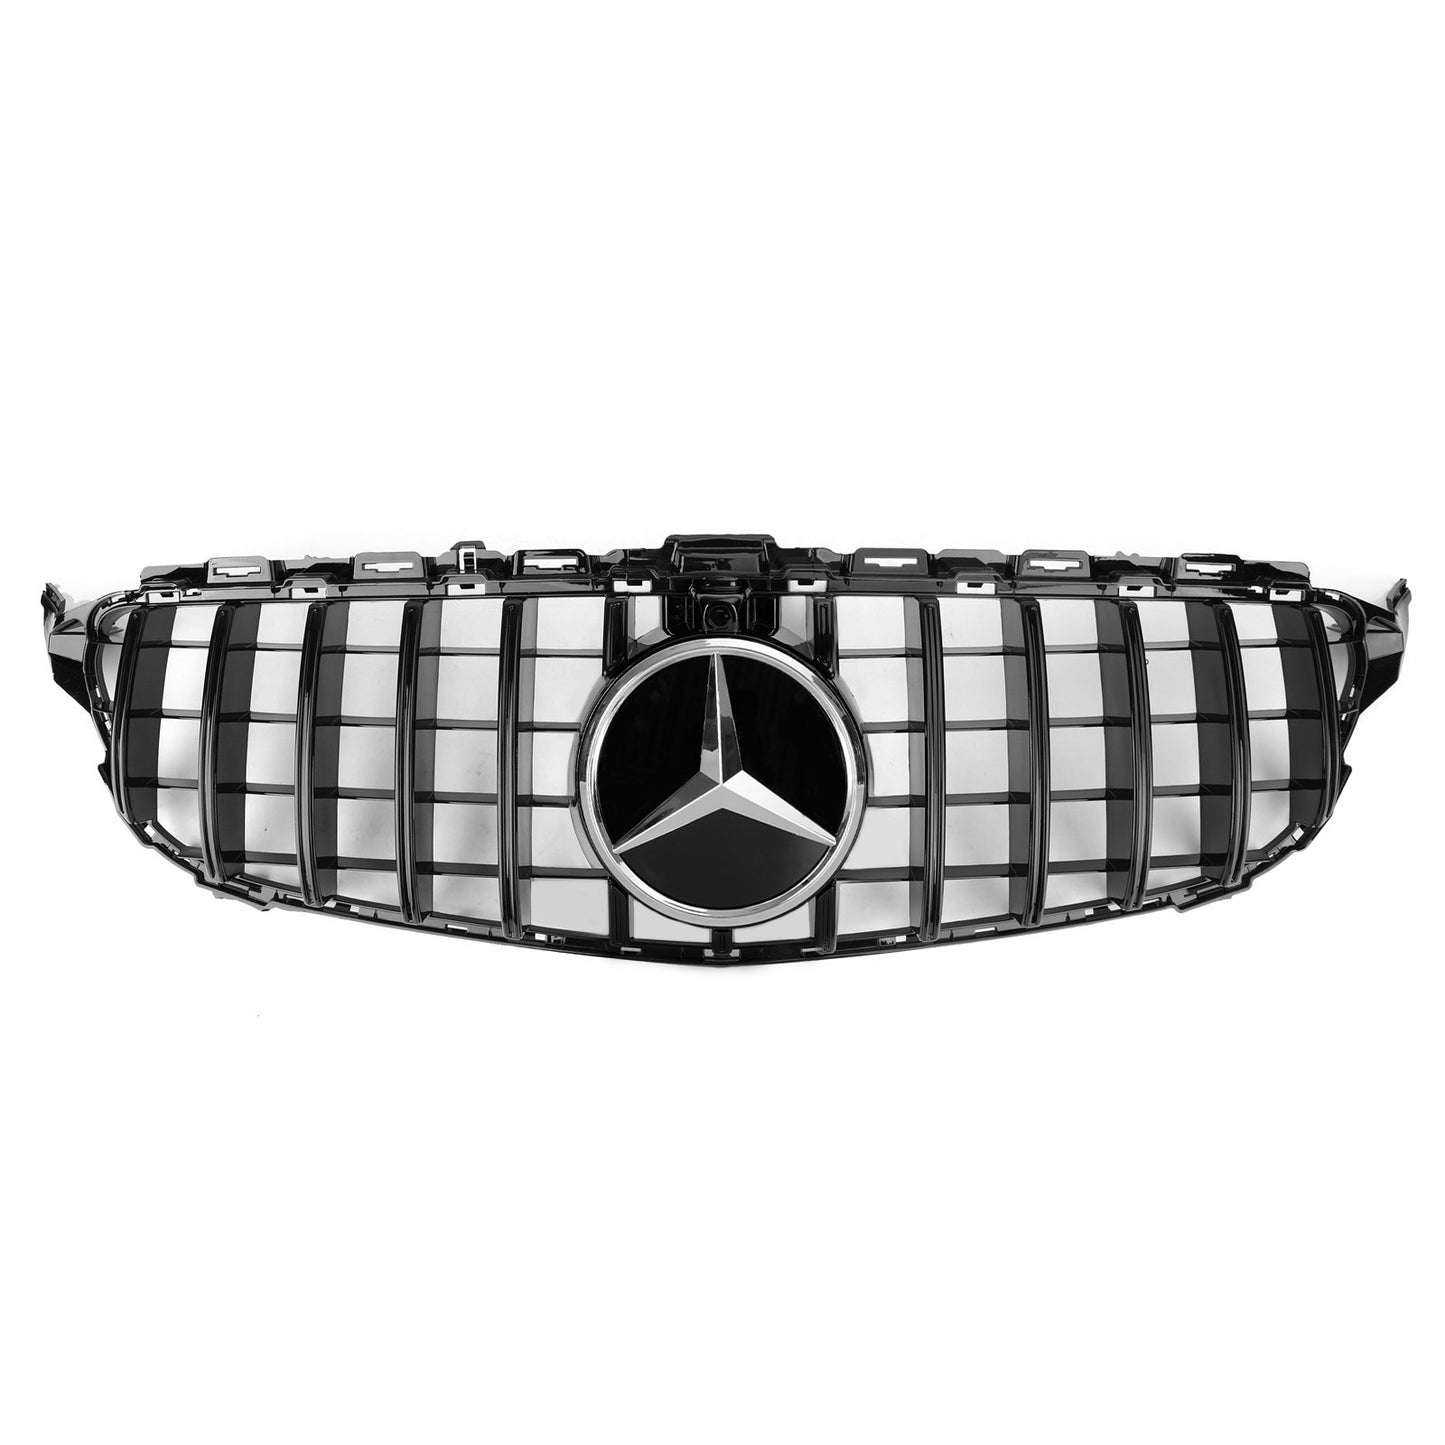 2019-2021 C class W205 C300 C250 Mercedes Benz AMG Grill Grille W/Camera GTR Style